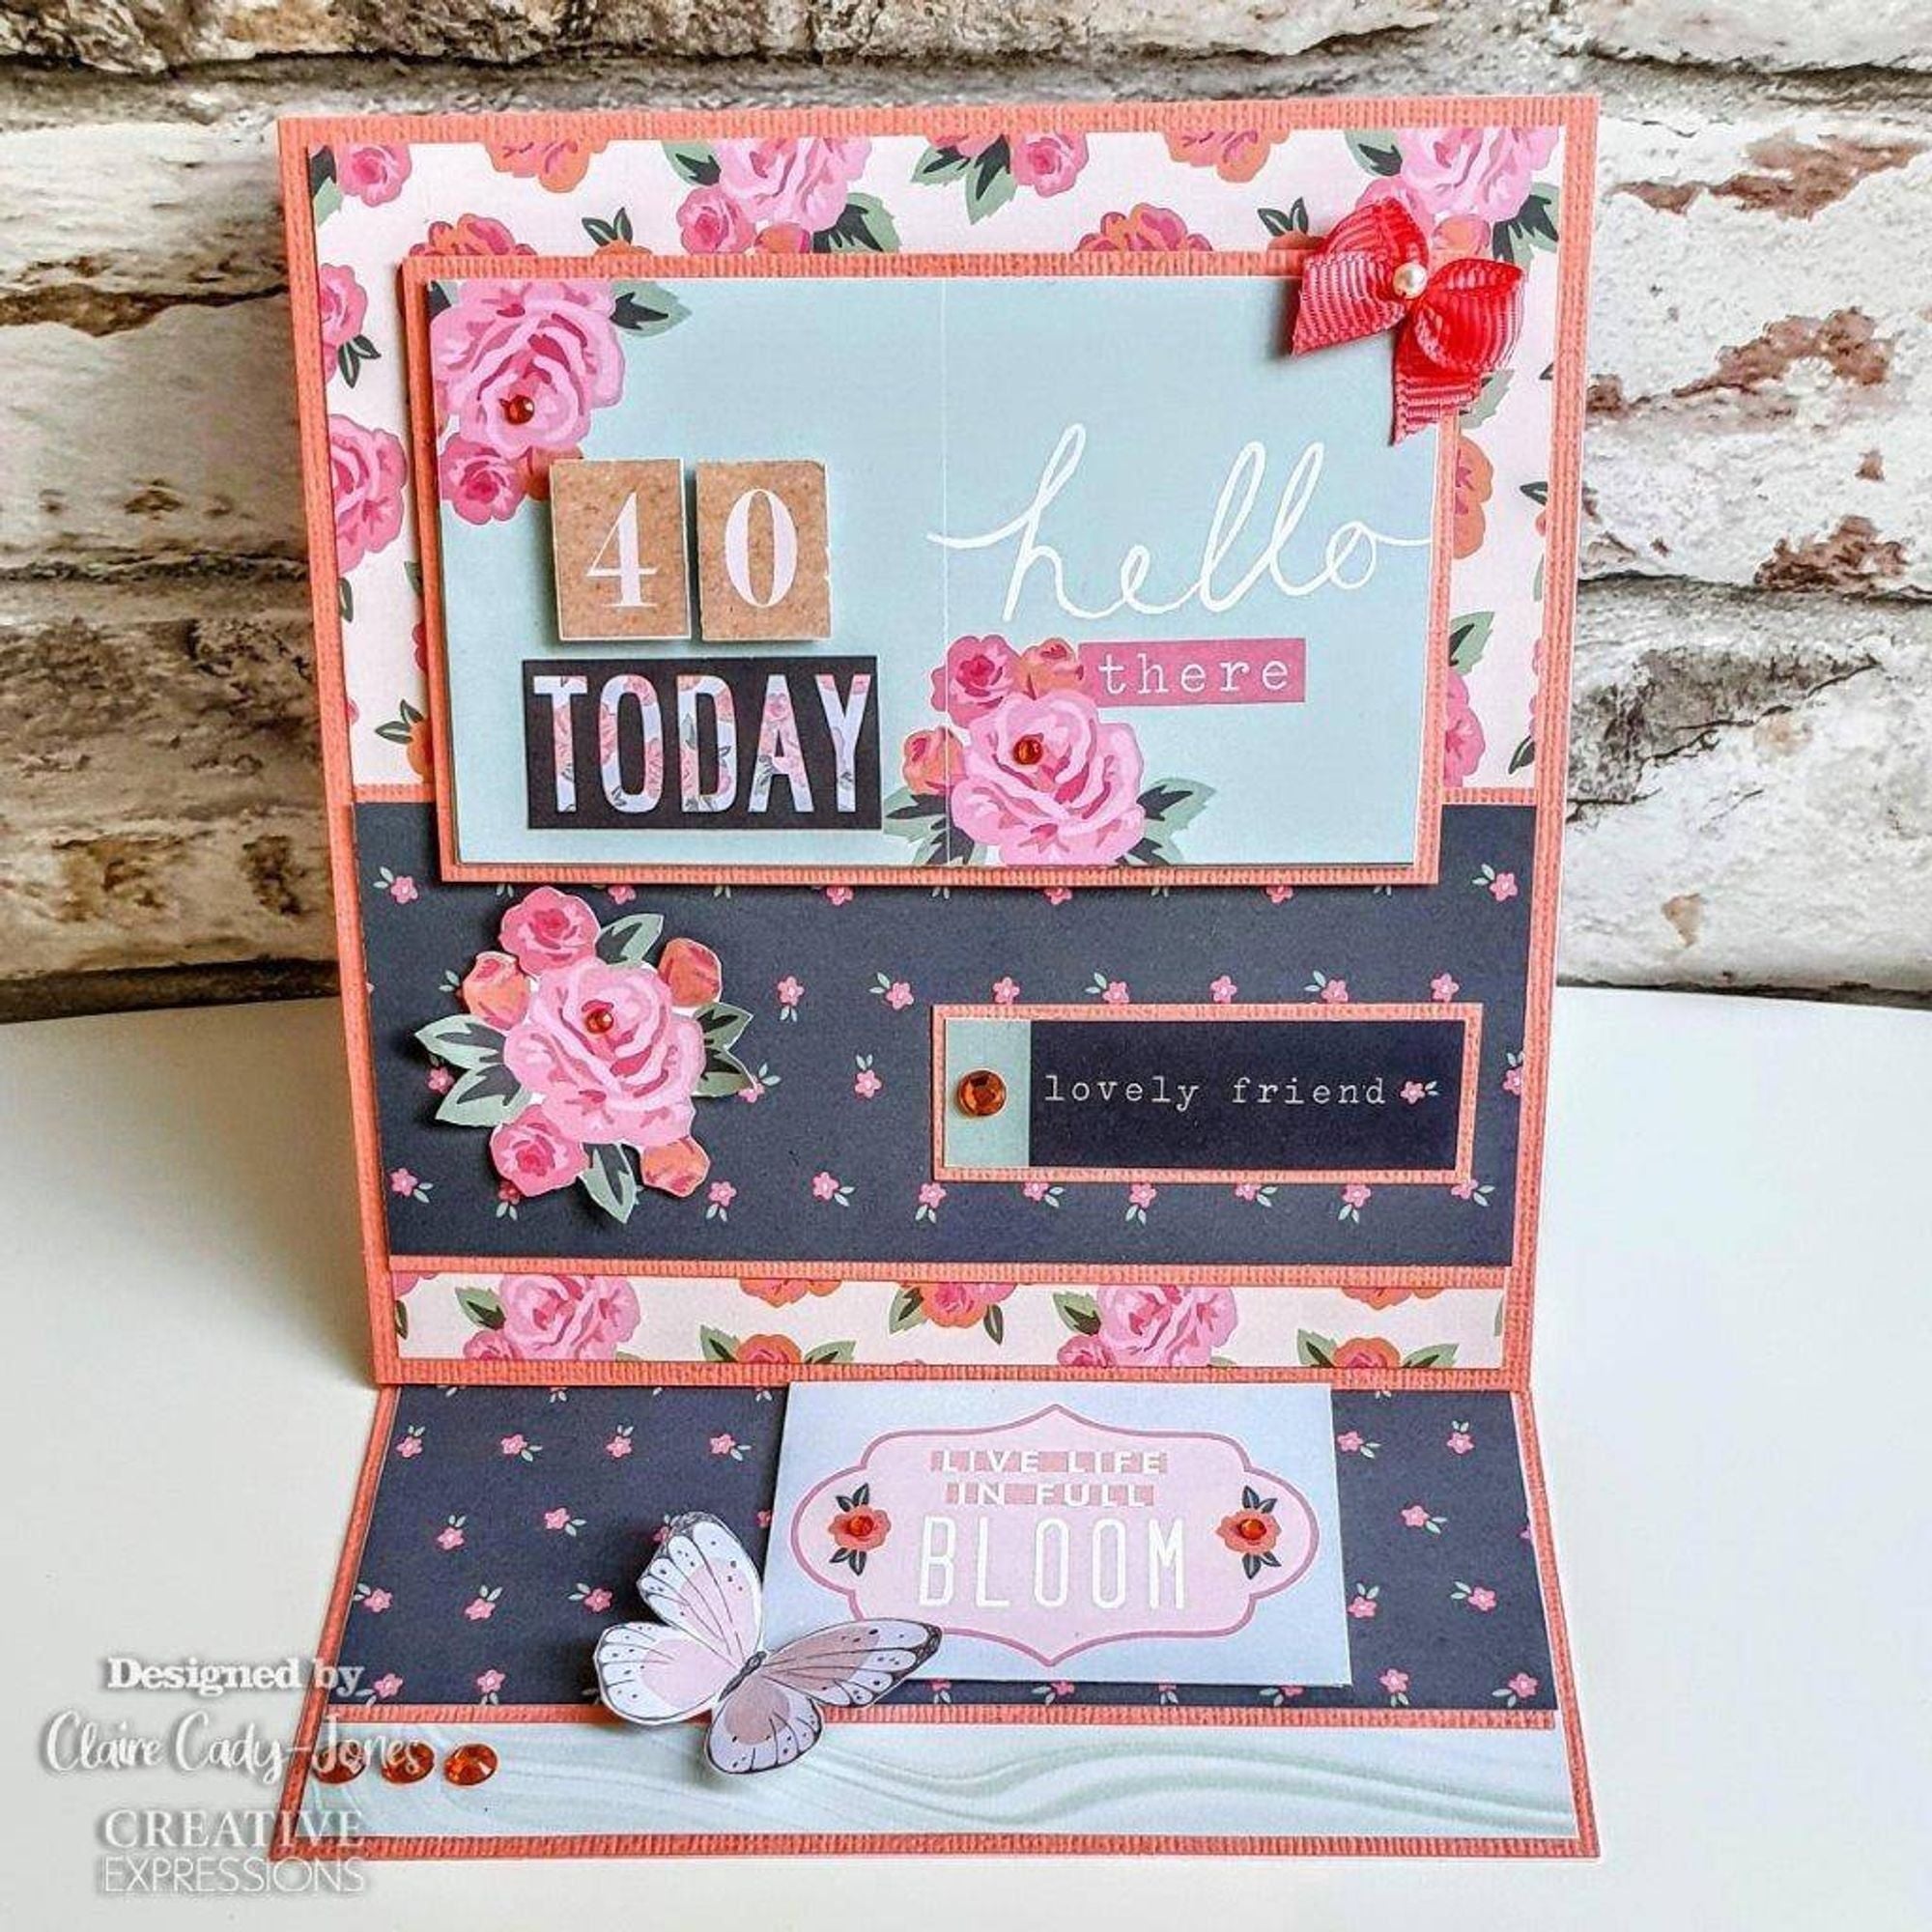 The Paper Boutique Lovely Days 12x12 Paper Pad